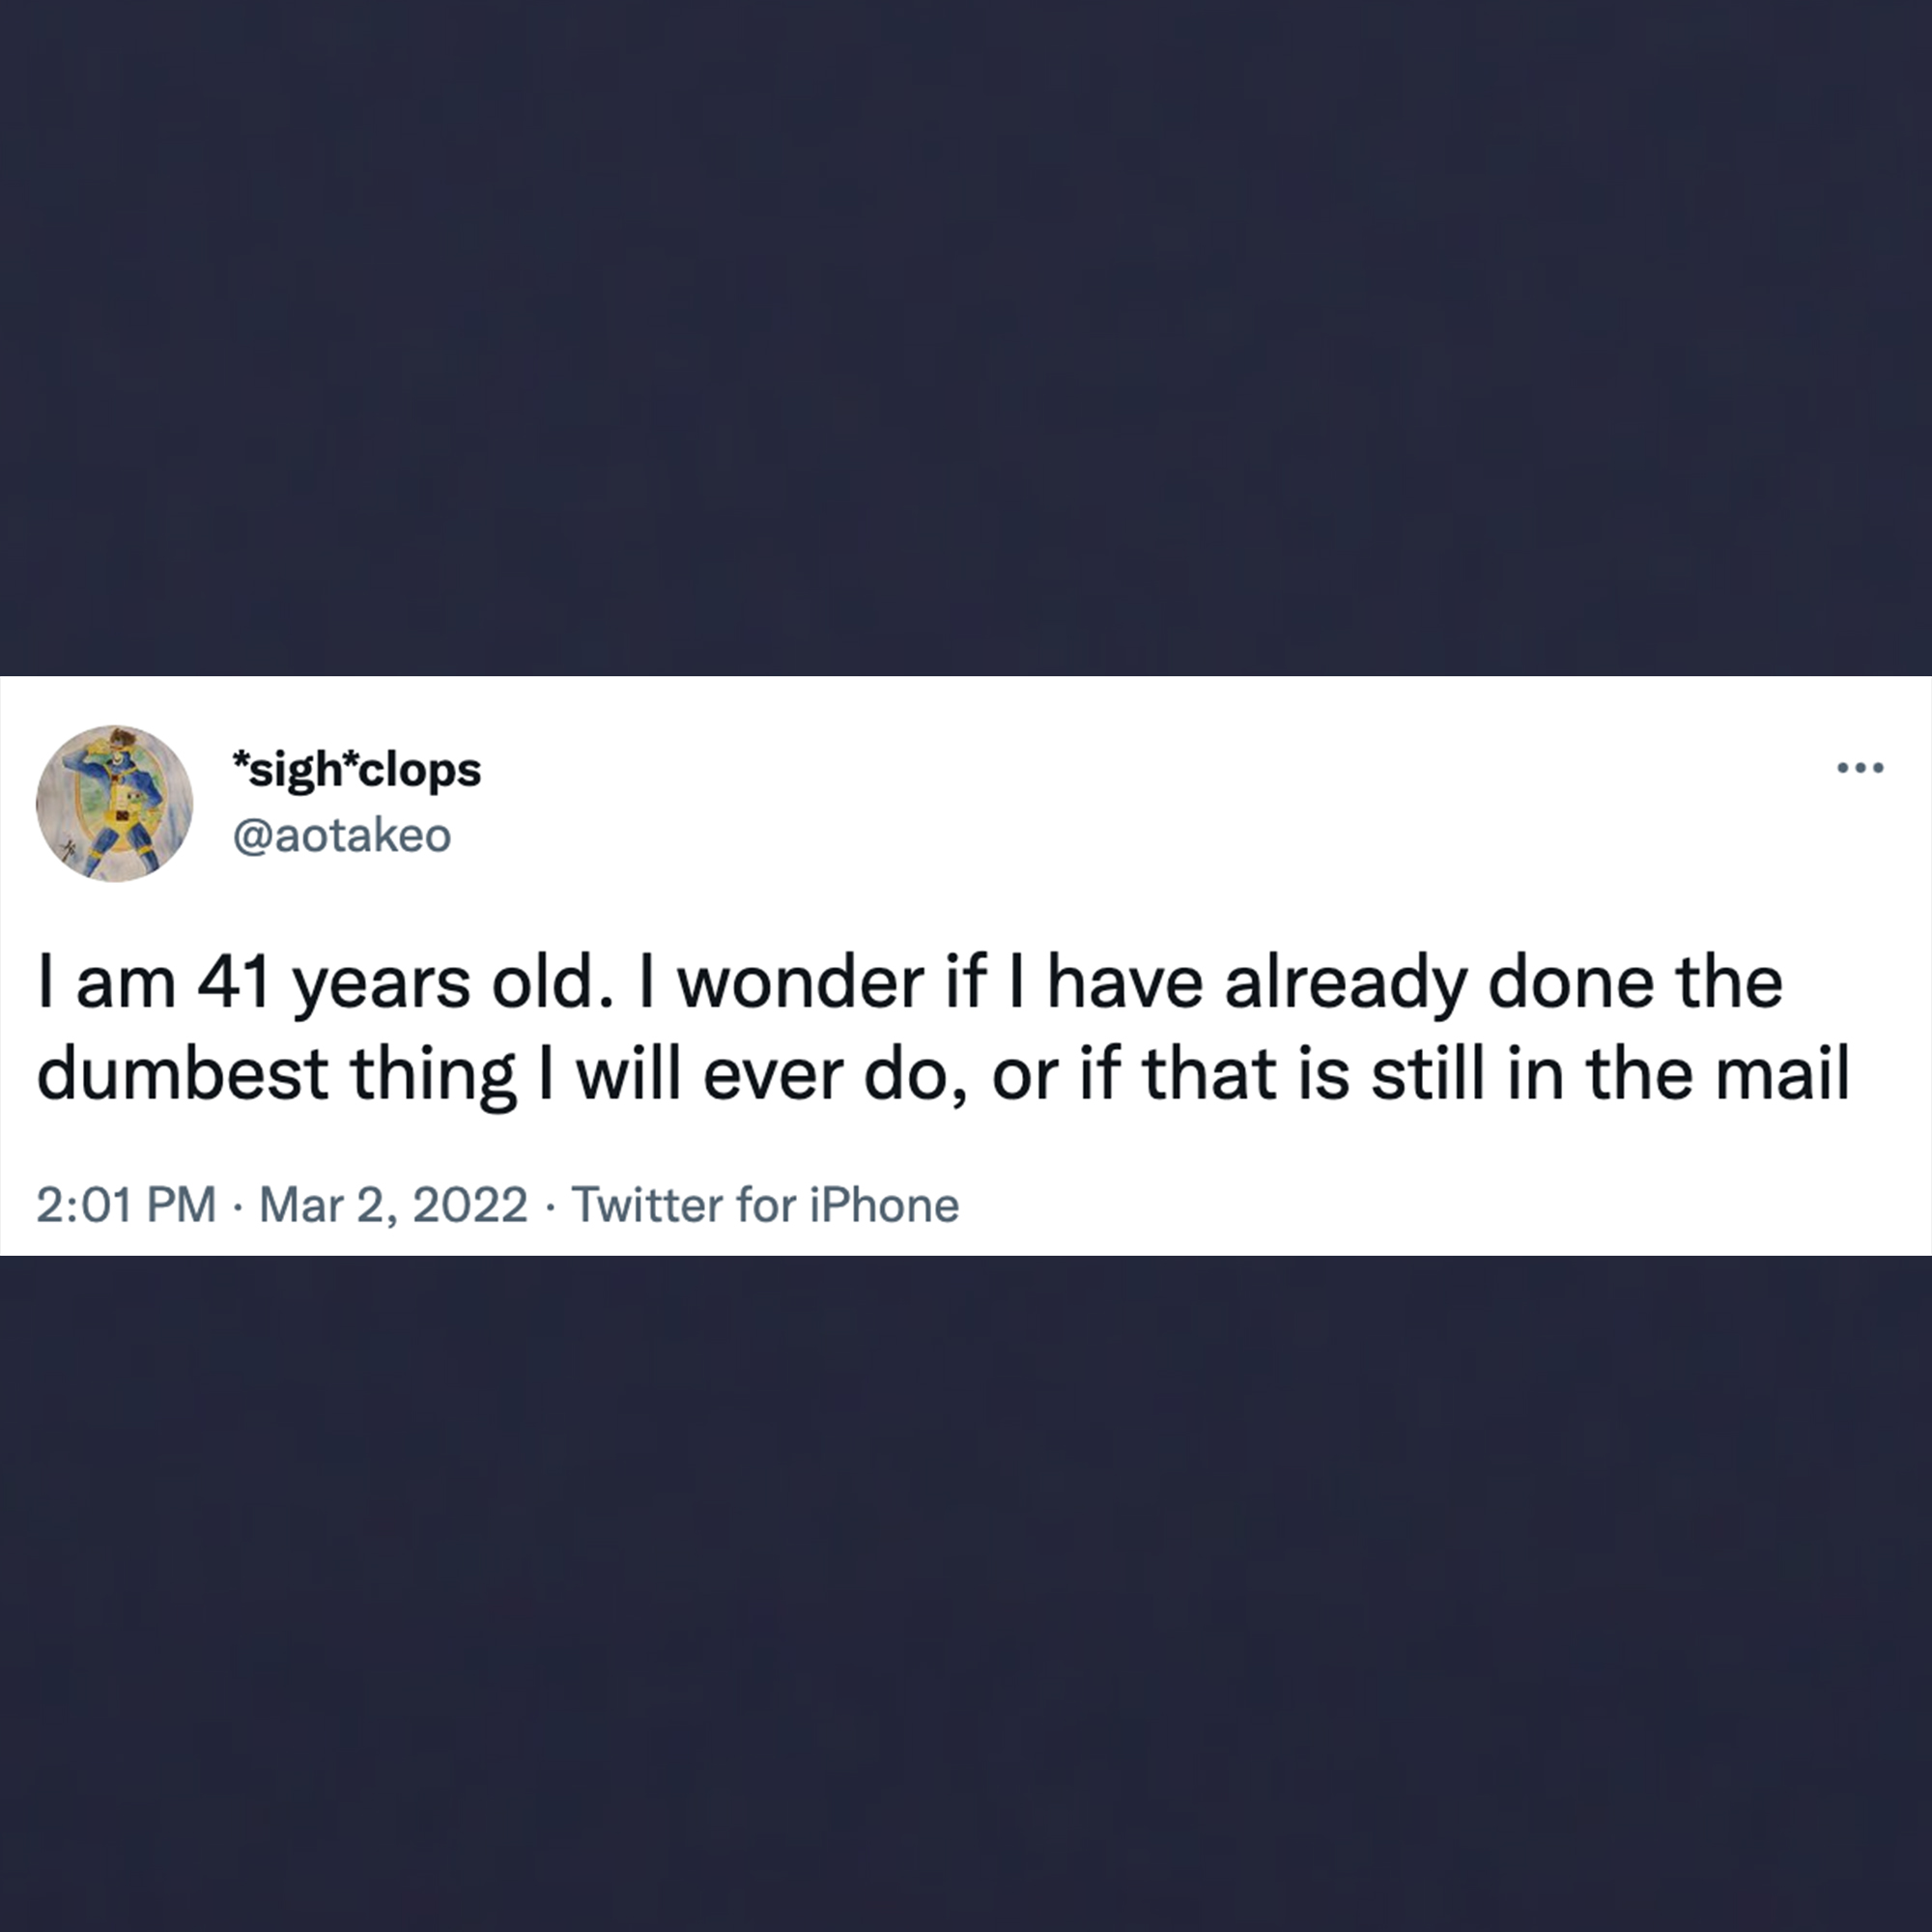 funny tweets - website - sighclops I am 41 years old. I wonder if I have already done the dumbest thing I will ever do, or if that is still in the mail Twitter for iPhone